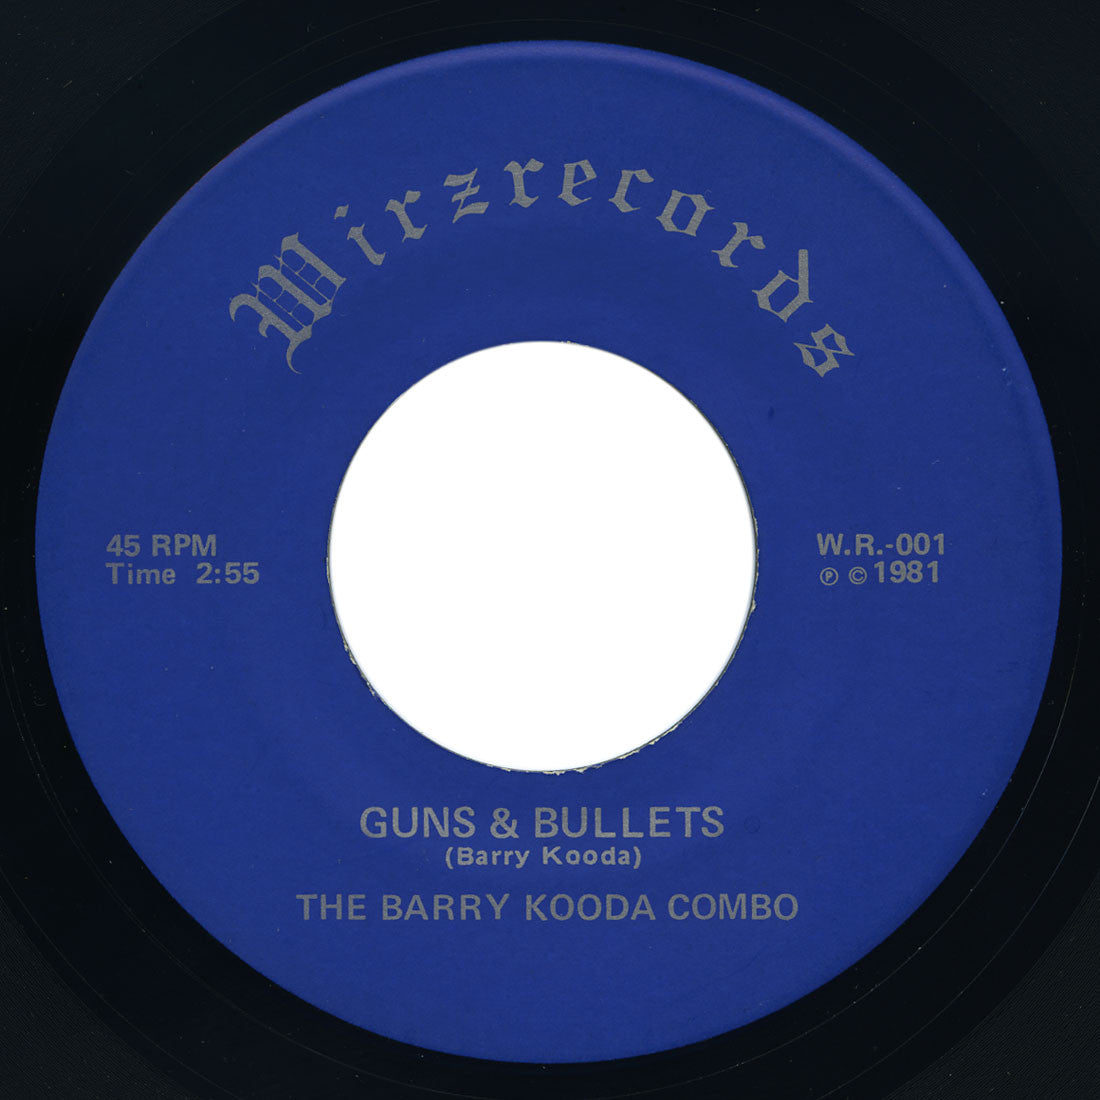 Barry Kooda Combo – Guns & Bullets / What Do You Want From Me? – Wirzrecords